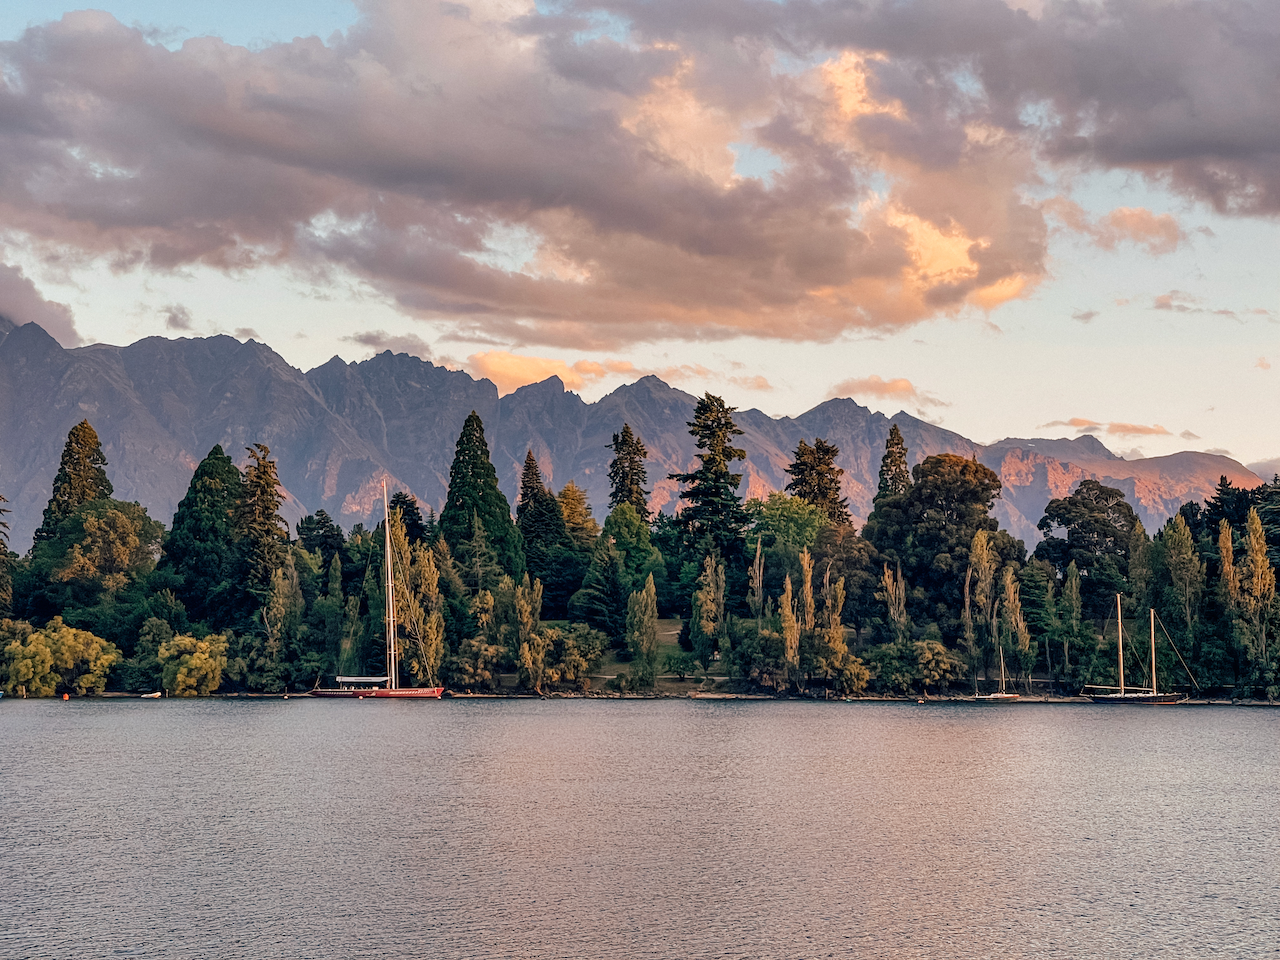 The beautiful Remarkables Mountain Range at sunset - Queenstown - New Zealand